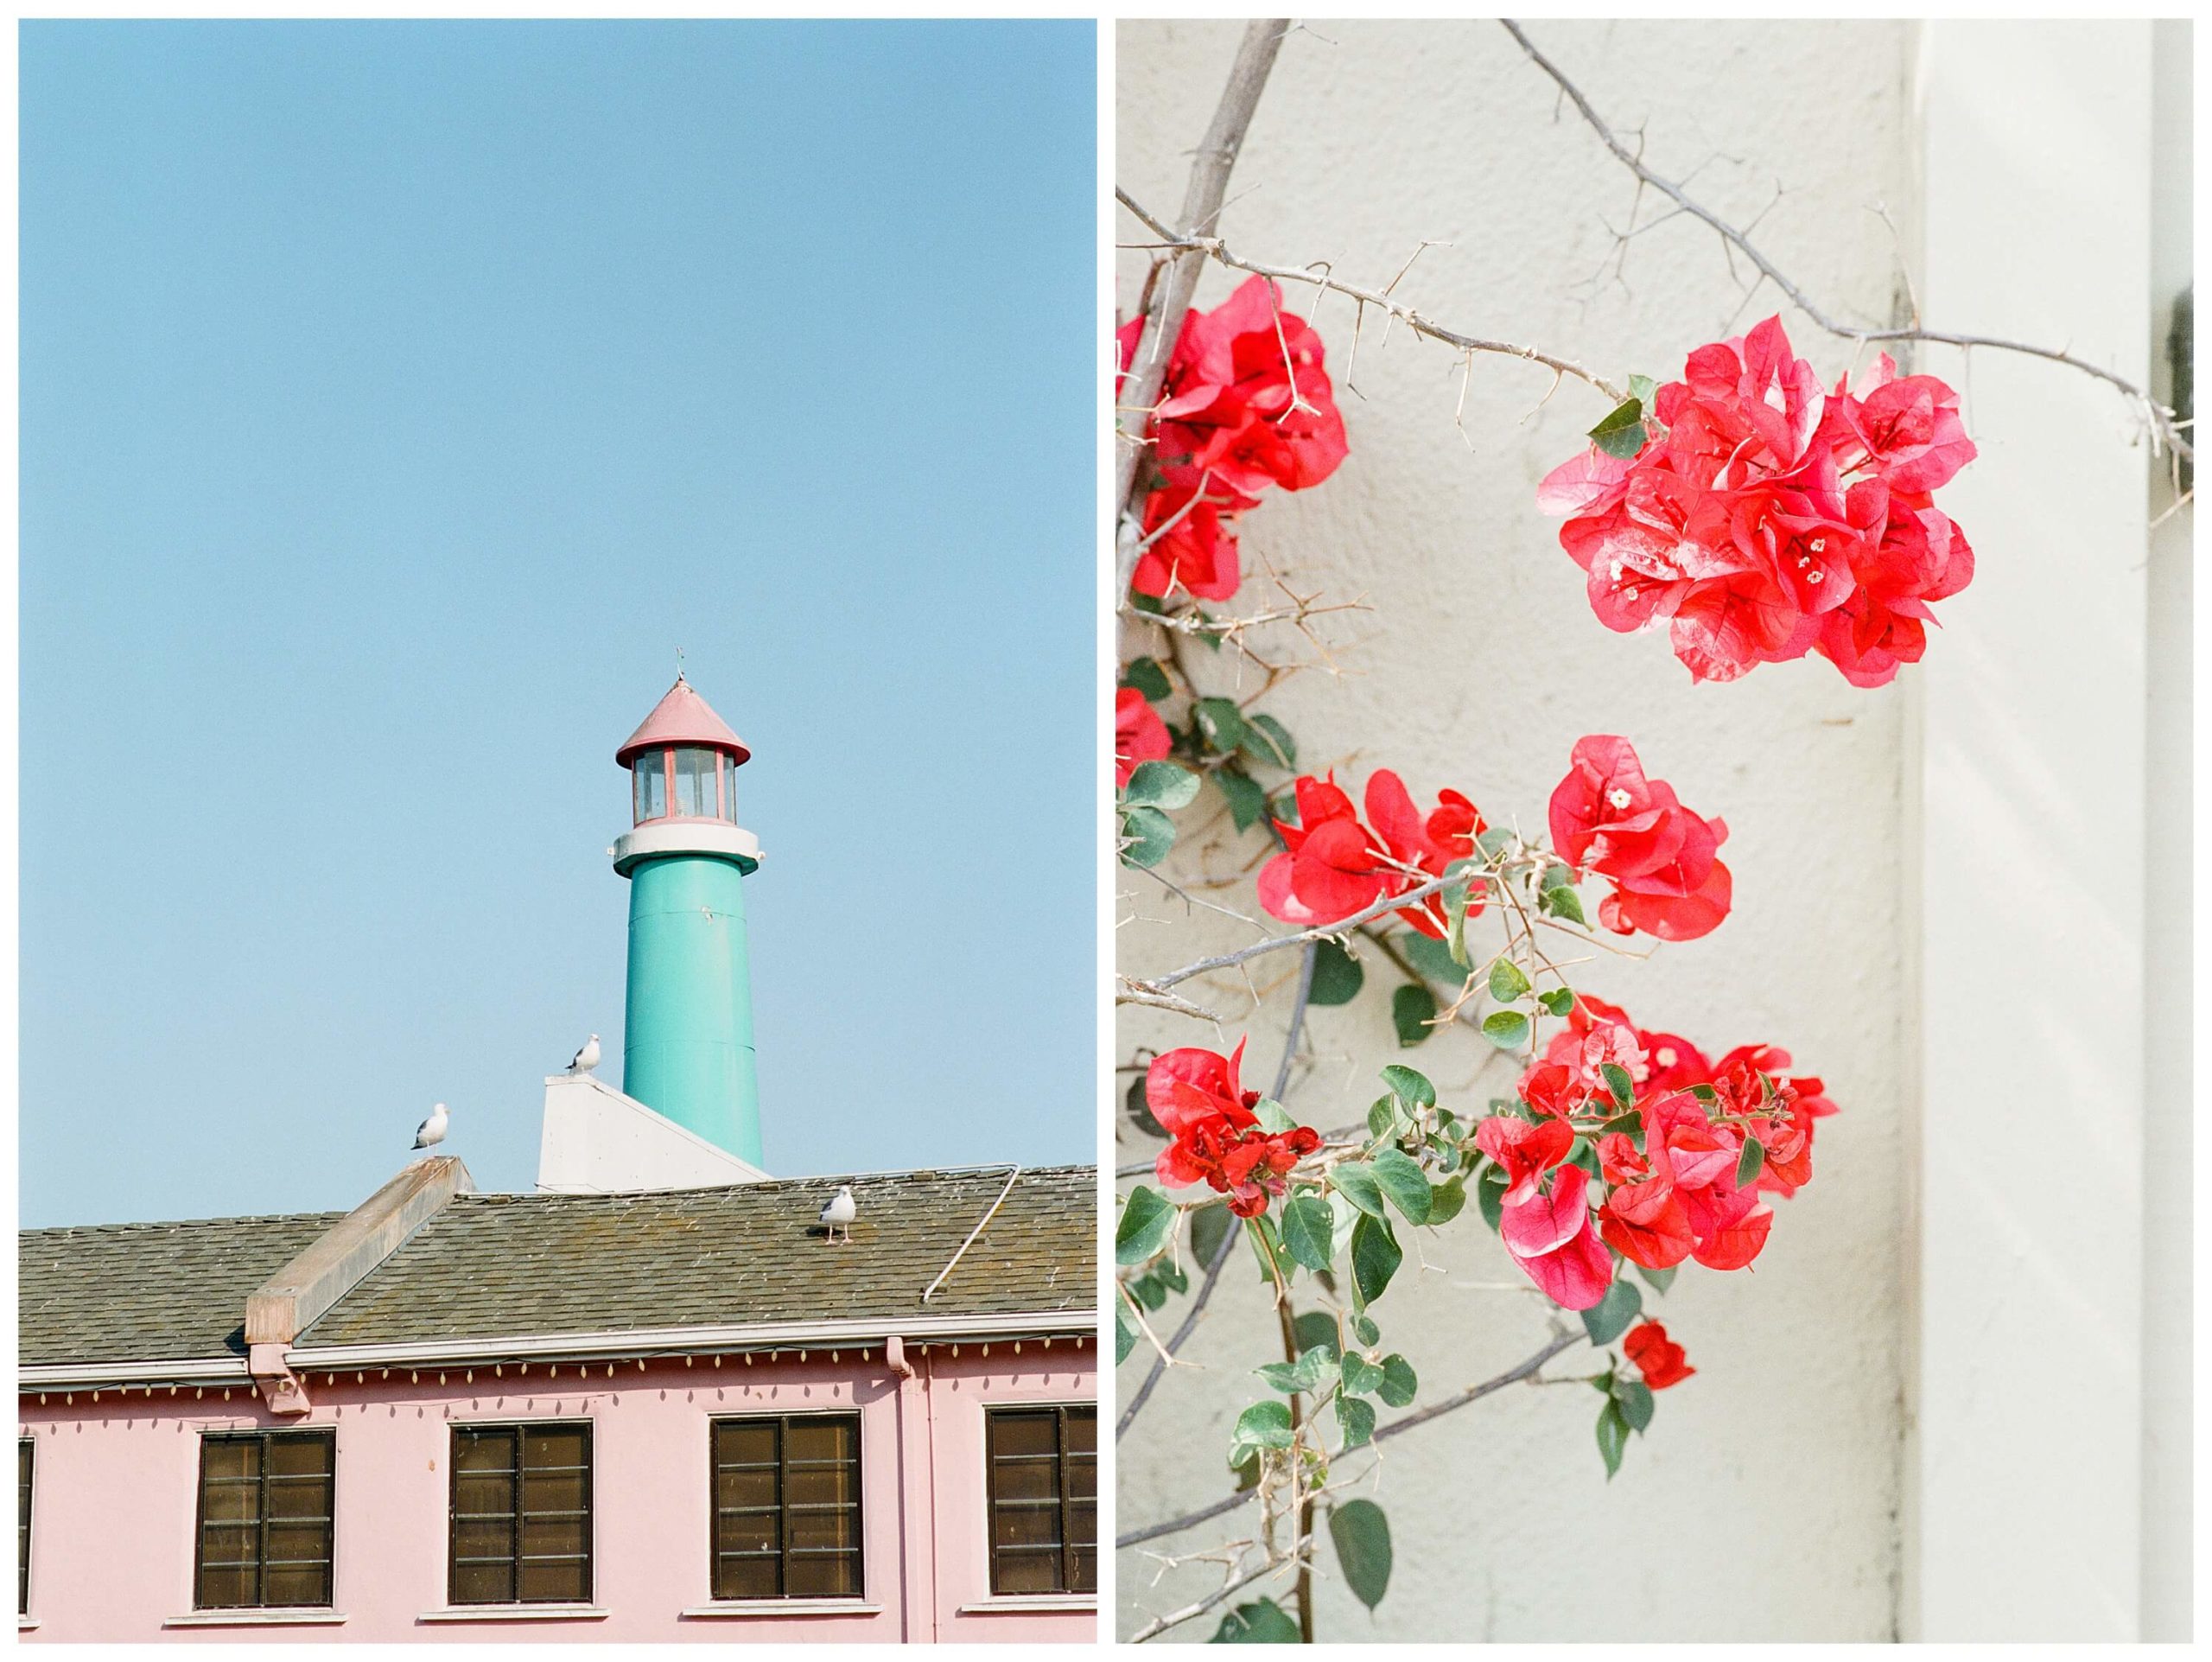 Left: A turquoise tower with a pink, conical roof, reminiscent of Wes Anderson, rises from behind a pink building. Right: Bougainvillea hangs on the vine against a beige wall as sunlight gently hits it.